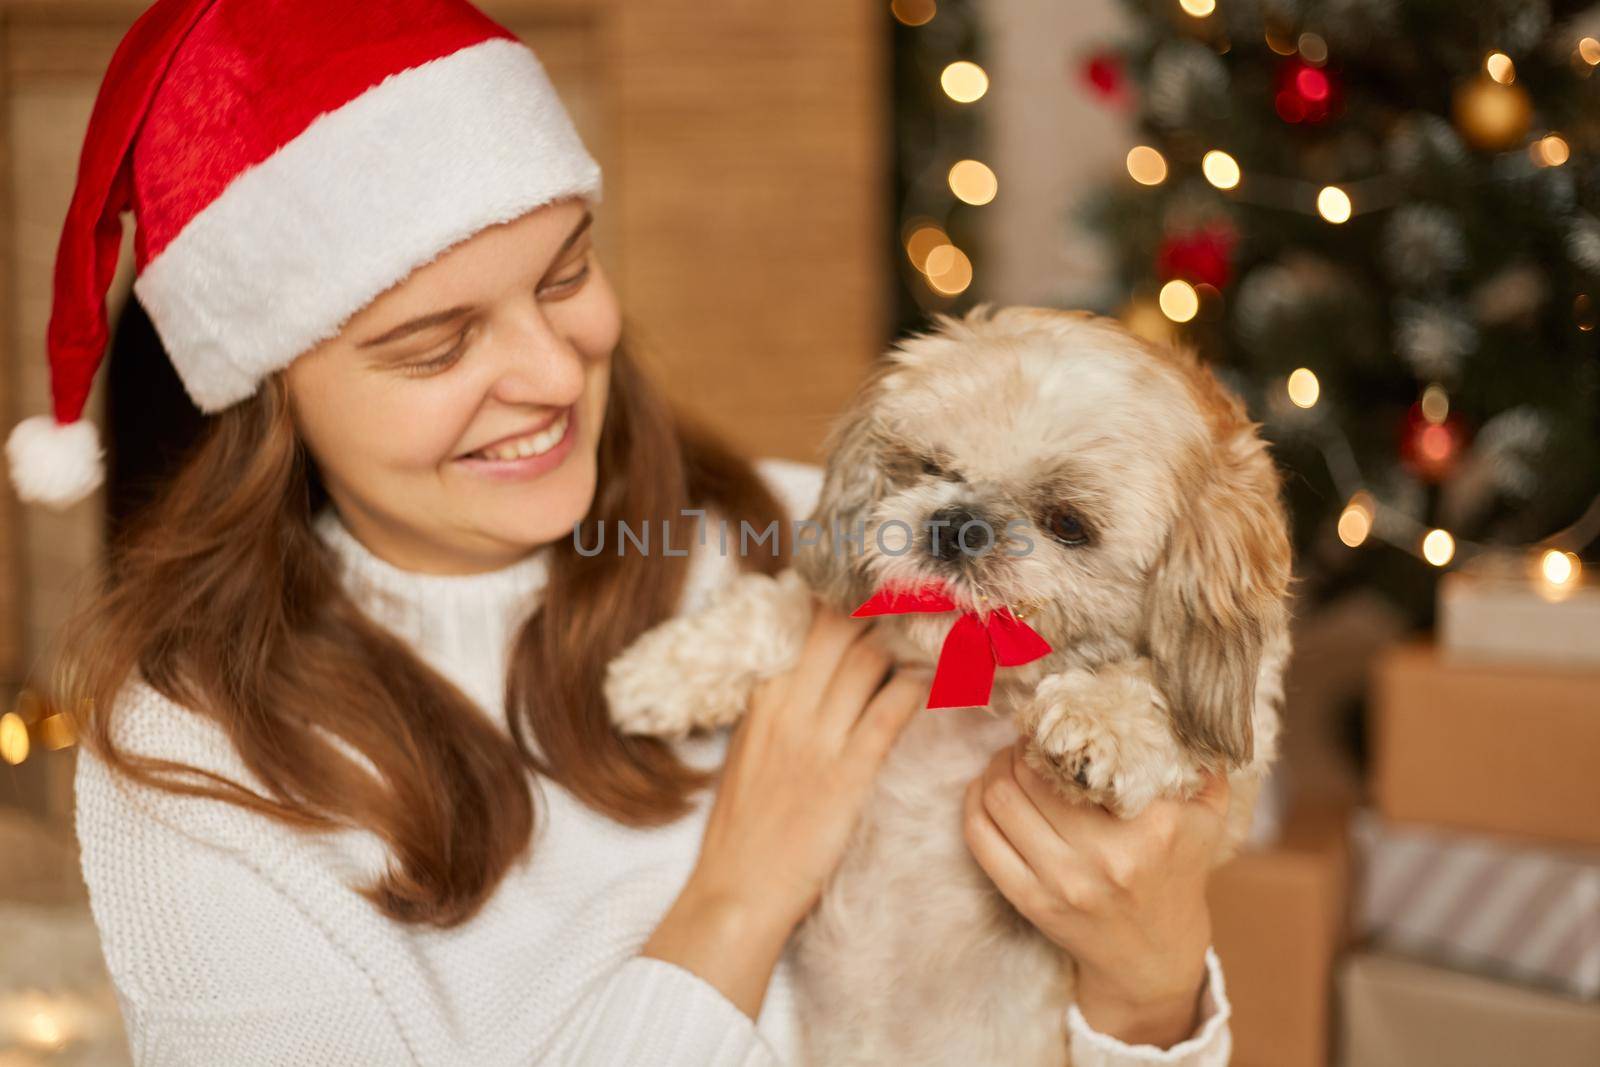 Small funny cute dog in woman on blurred Christmas background, puppy with red bow in teeth, smiling girl in santa claus hat playing with pet, expressing positive emotions.